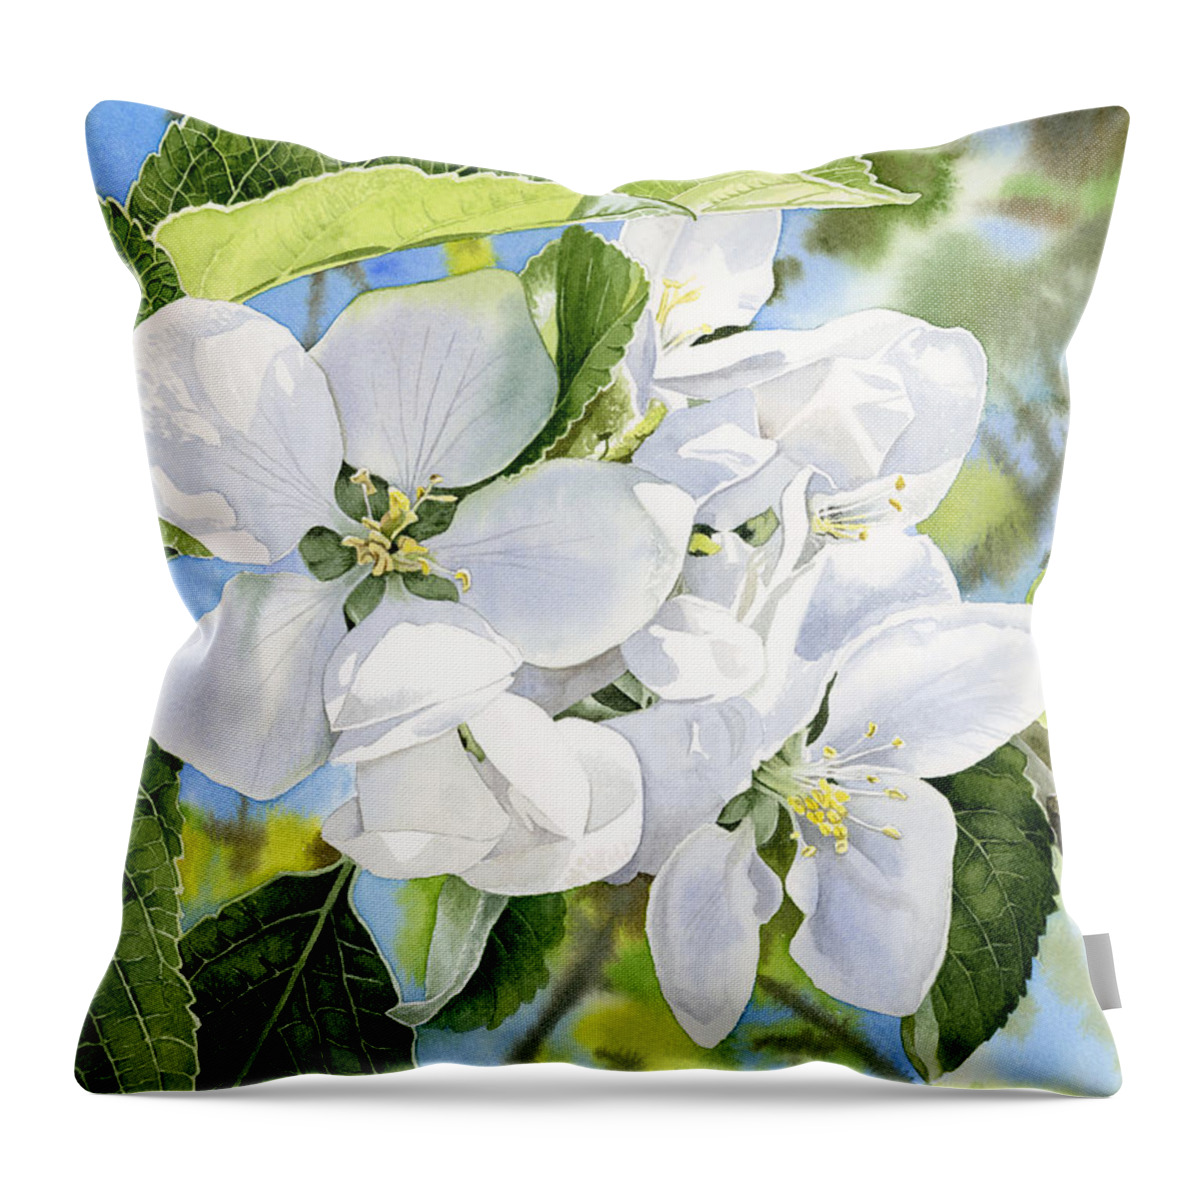 Apple Blossoms Throw Pillow featuring the painting Apple Blossoms by Espero Art